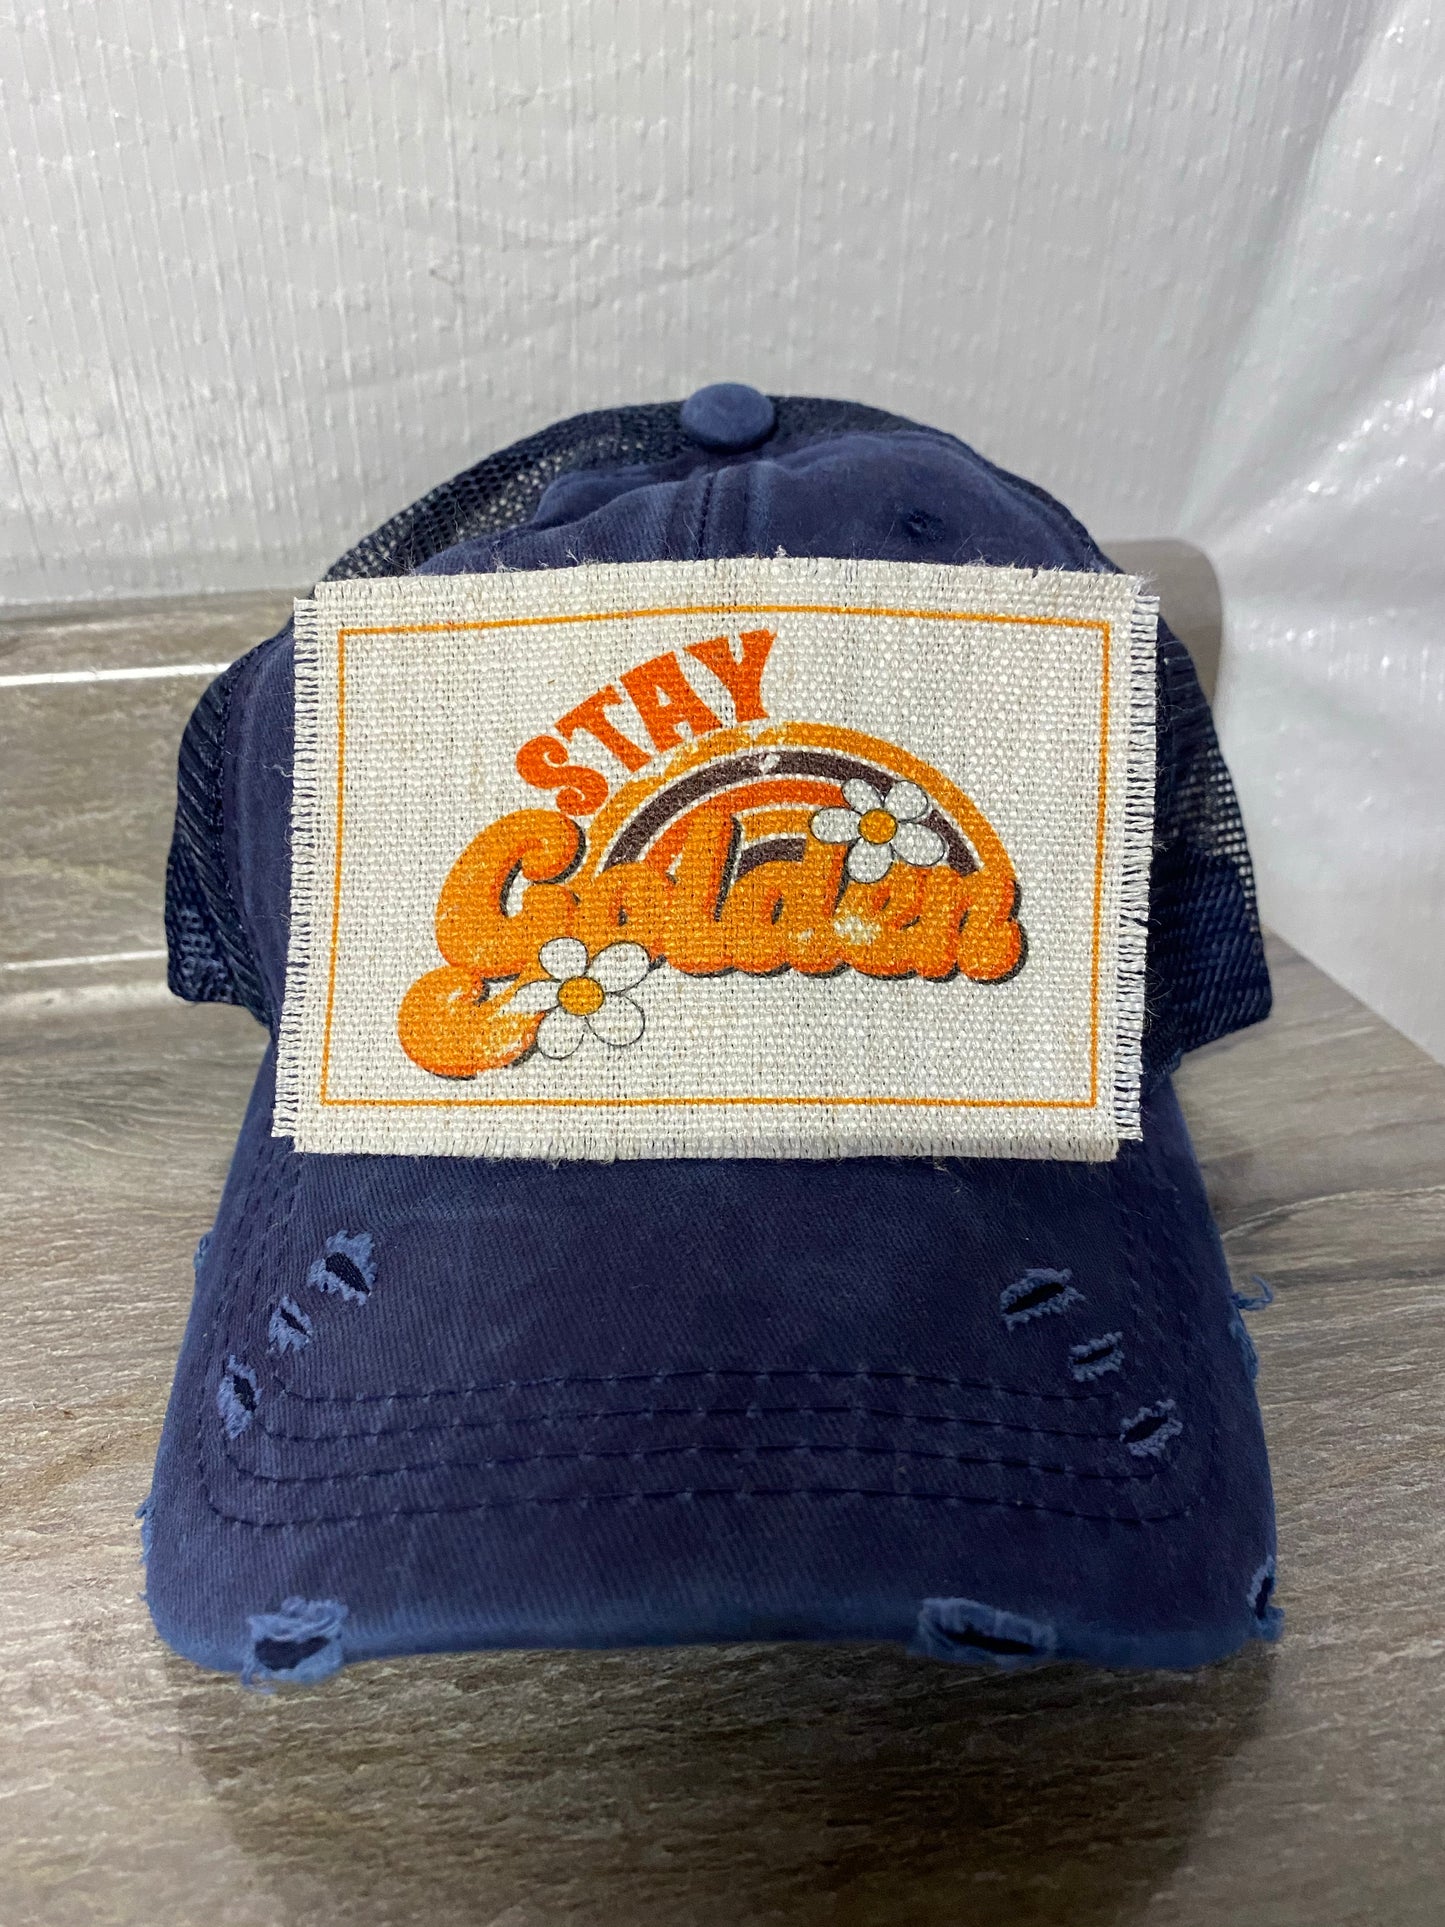 Stay Golden Hat Patch